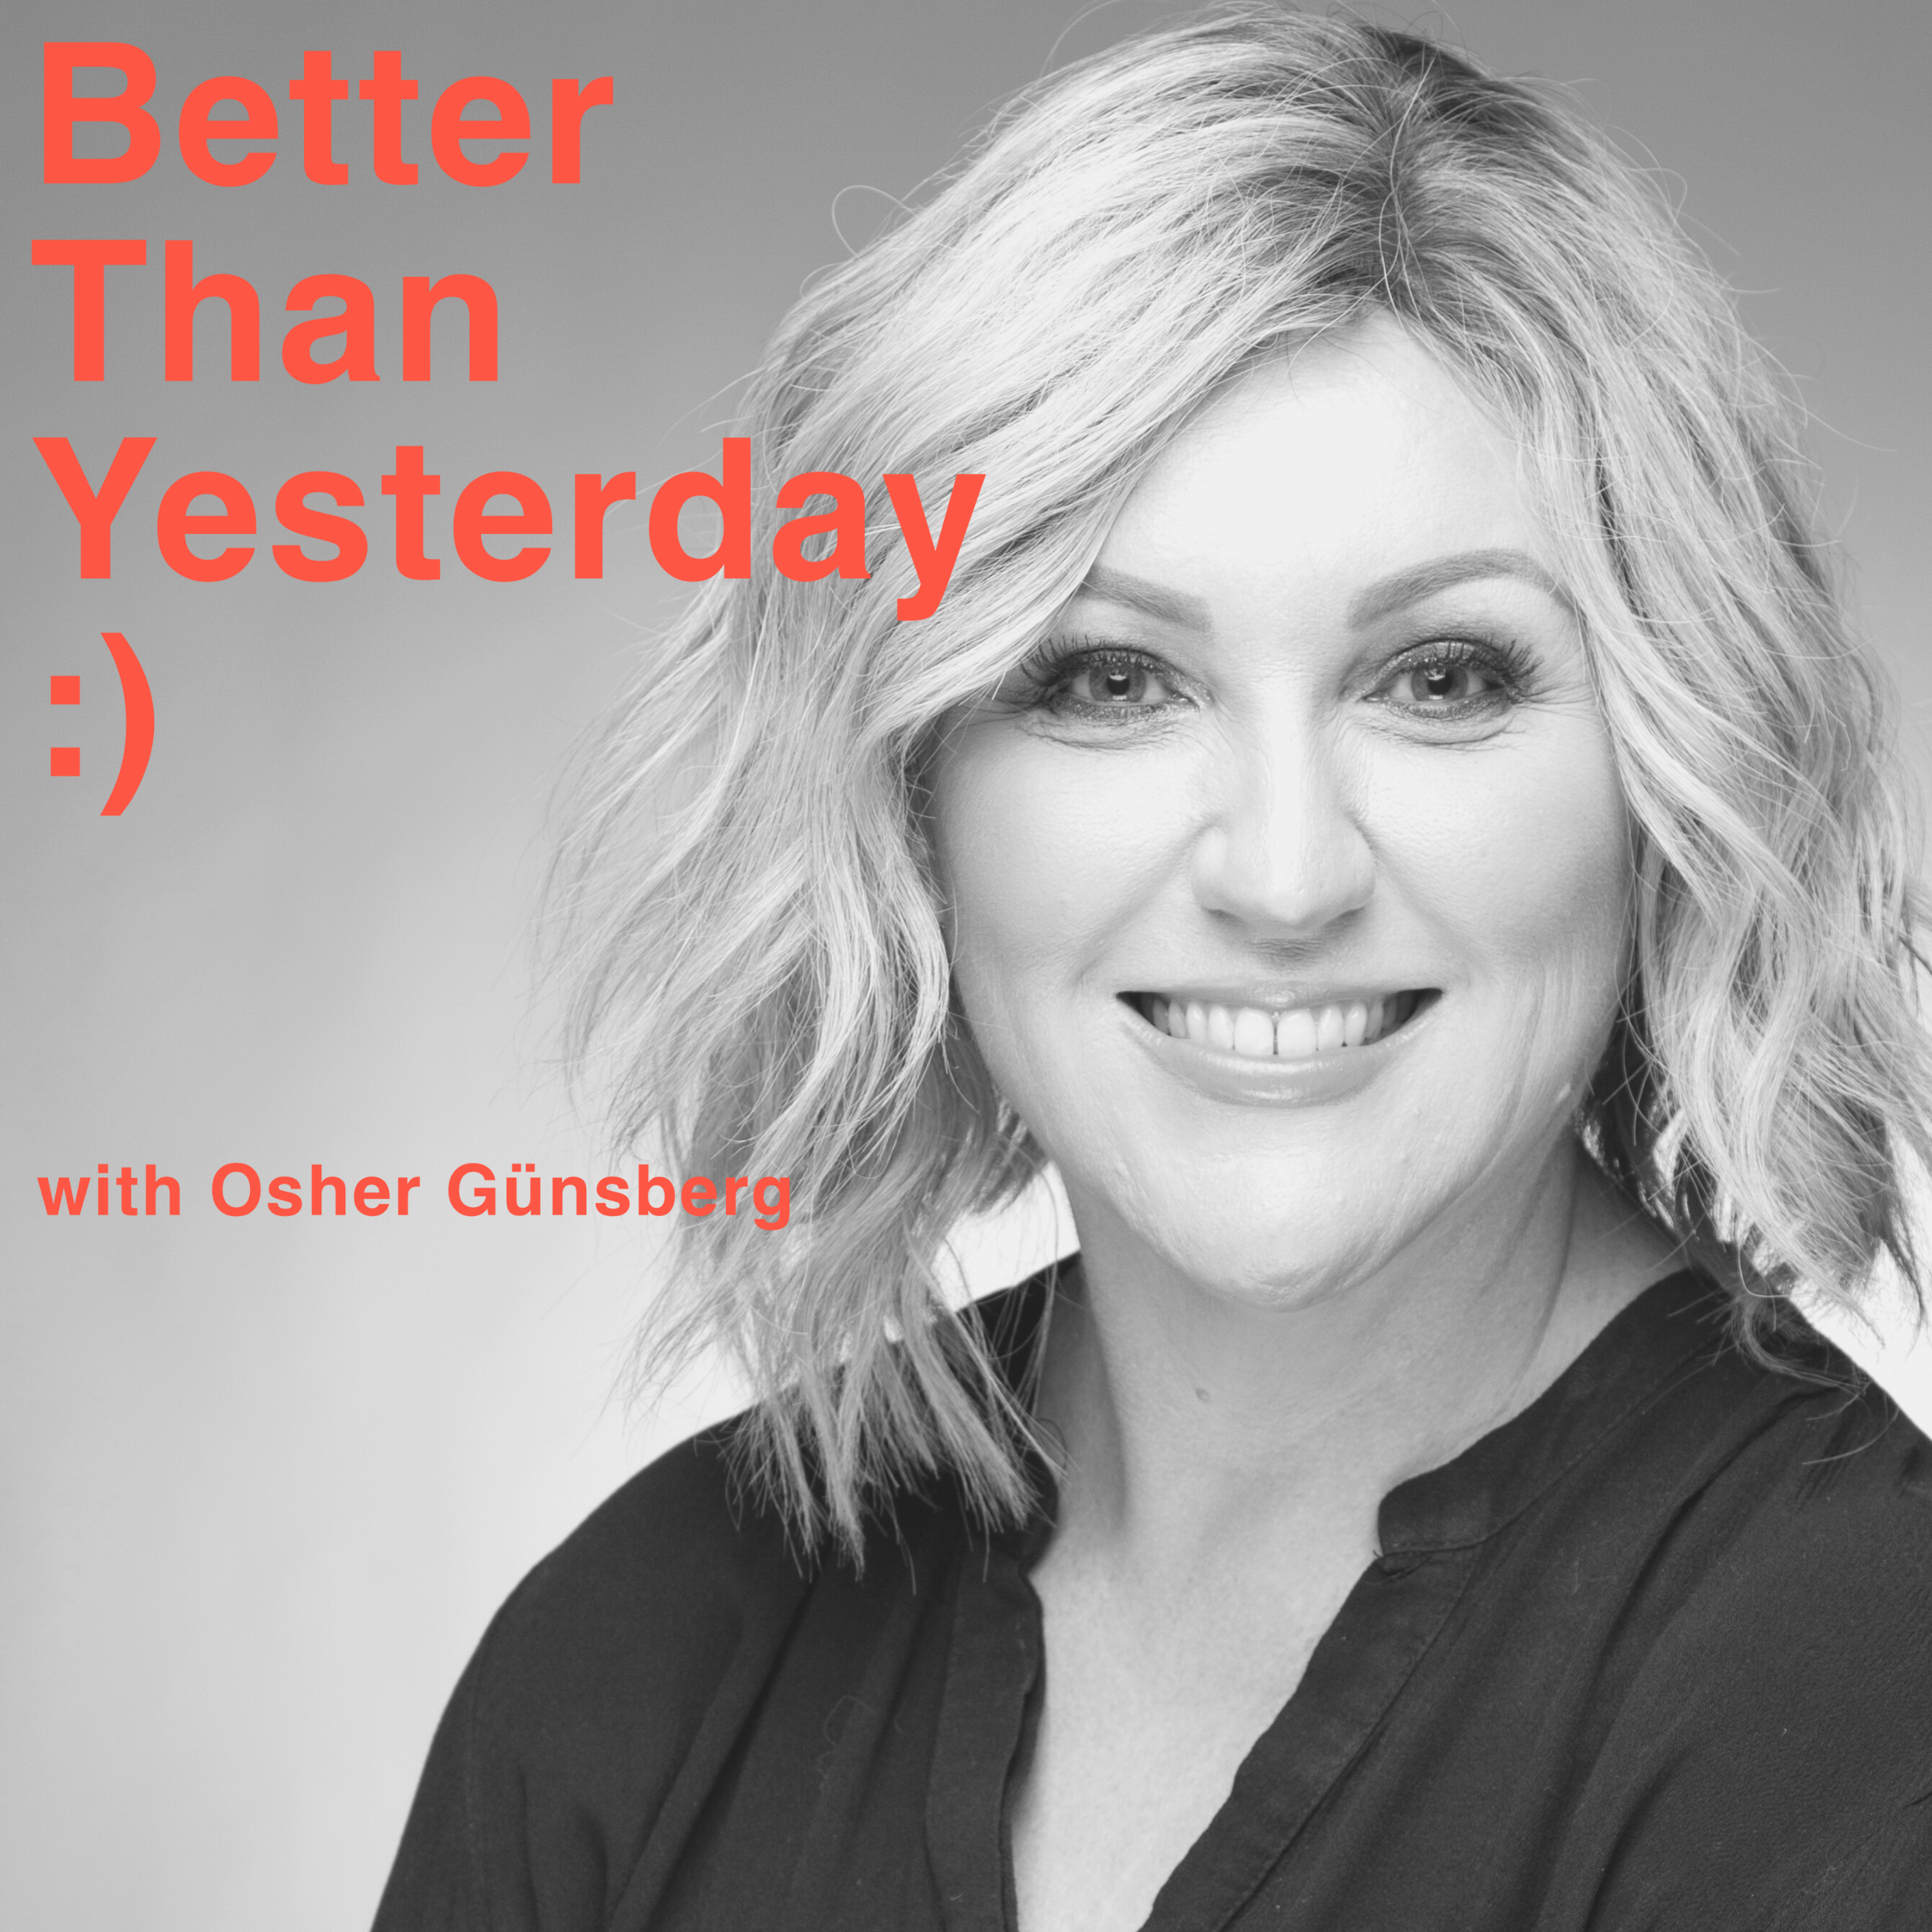 398: CSI Told you Lies - but Meshel Laurie is here with Facts and an Empathy Bomb that will blow you away.